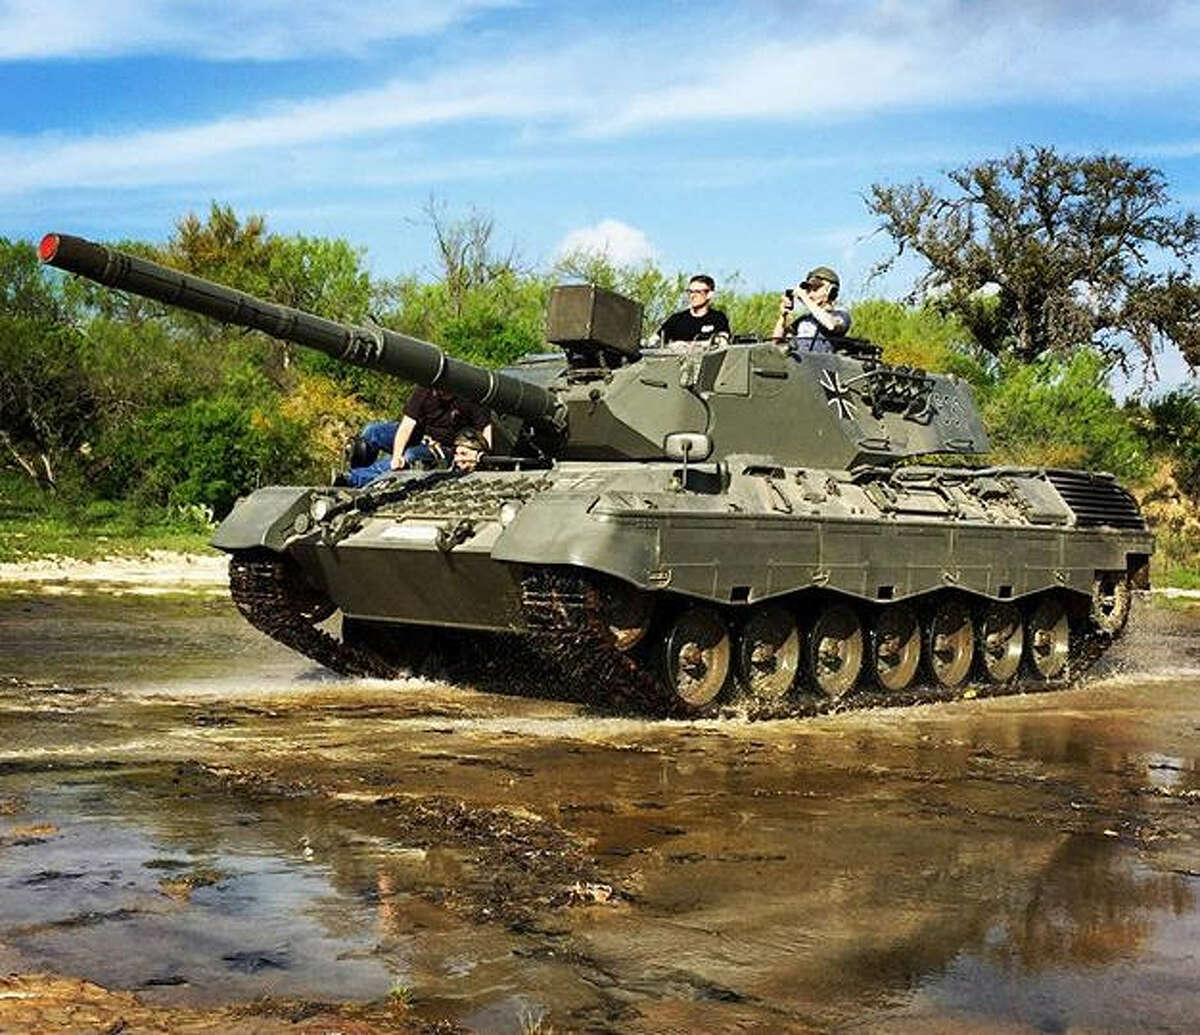 can you buy a fully functional military tank?